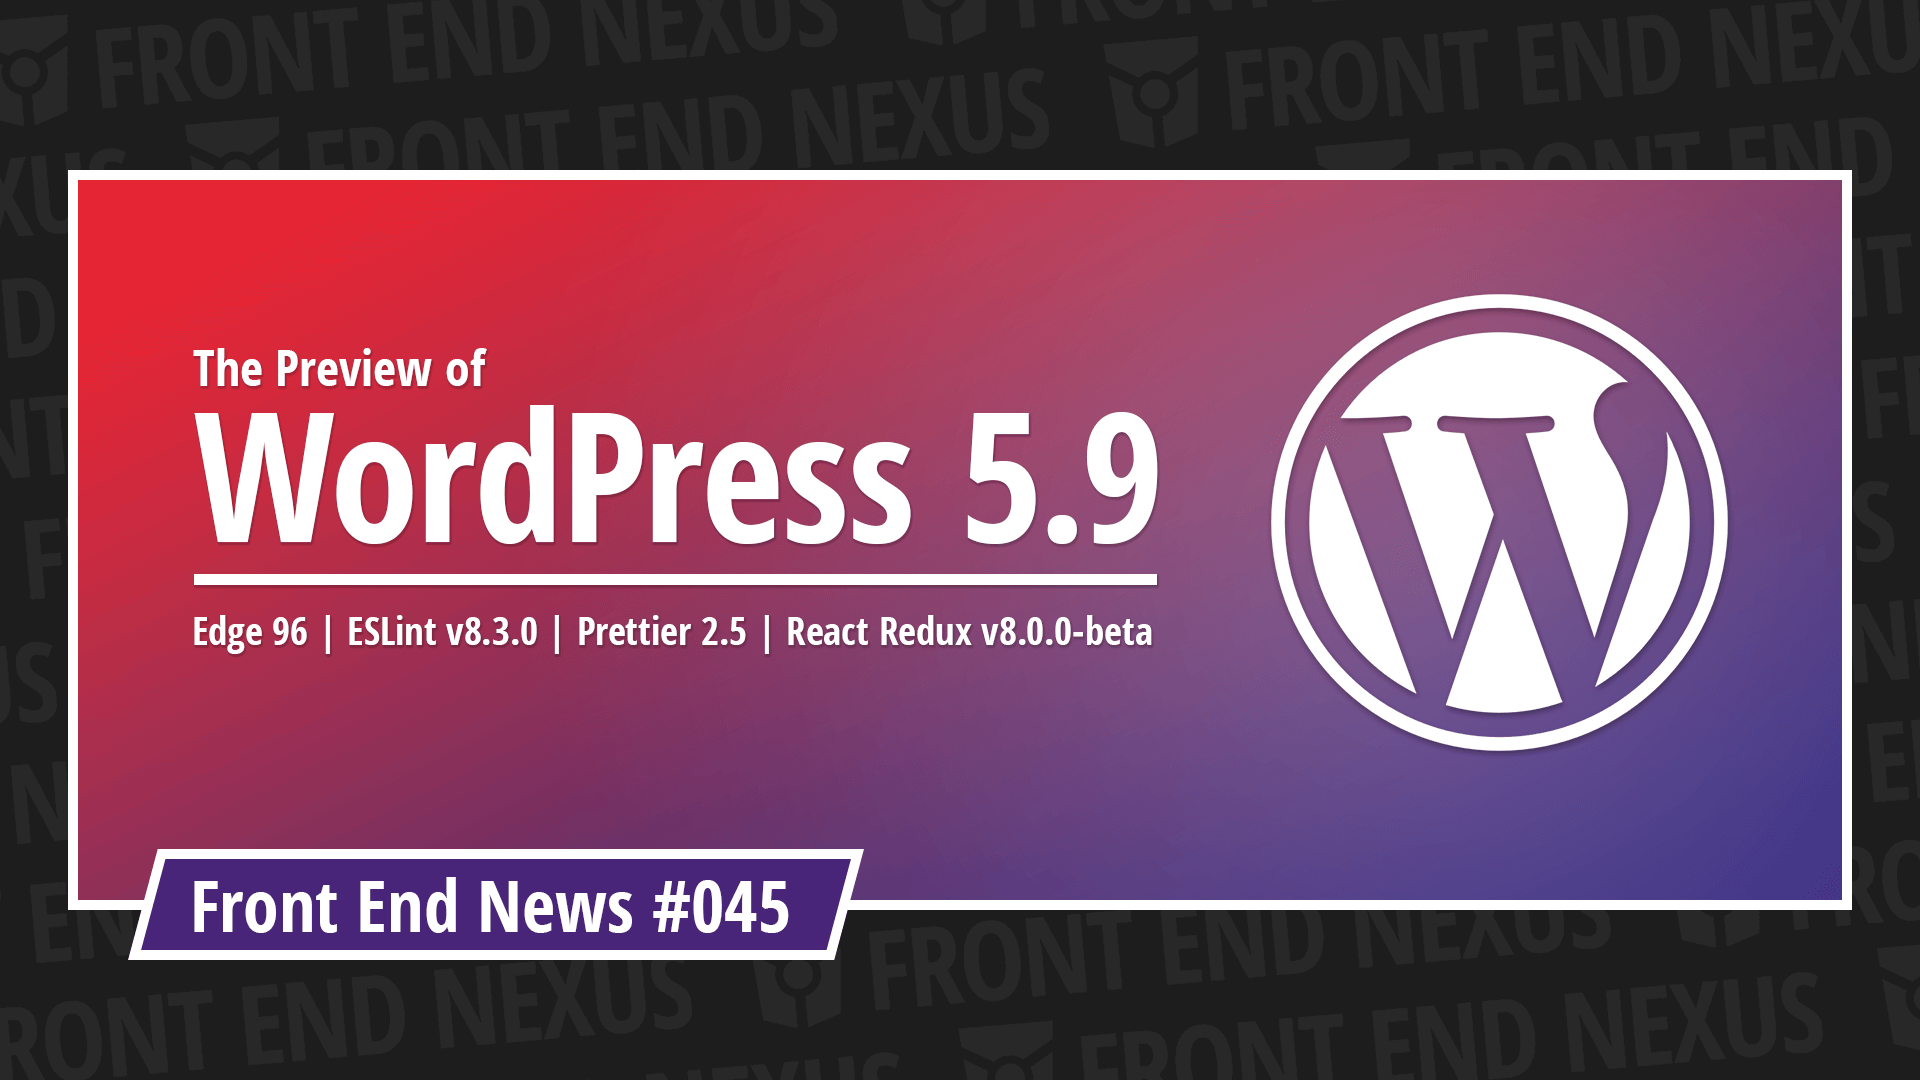 What's coming in WordPress 5.9, Edge 96, ESLint 8.3, Prettier 2.5, and React Redux 8 beta | Front End News #045